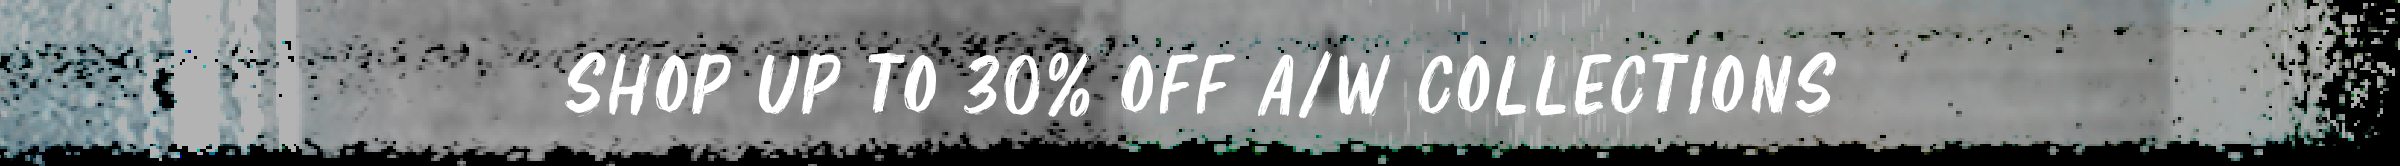 Up to 30% off A/W collections